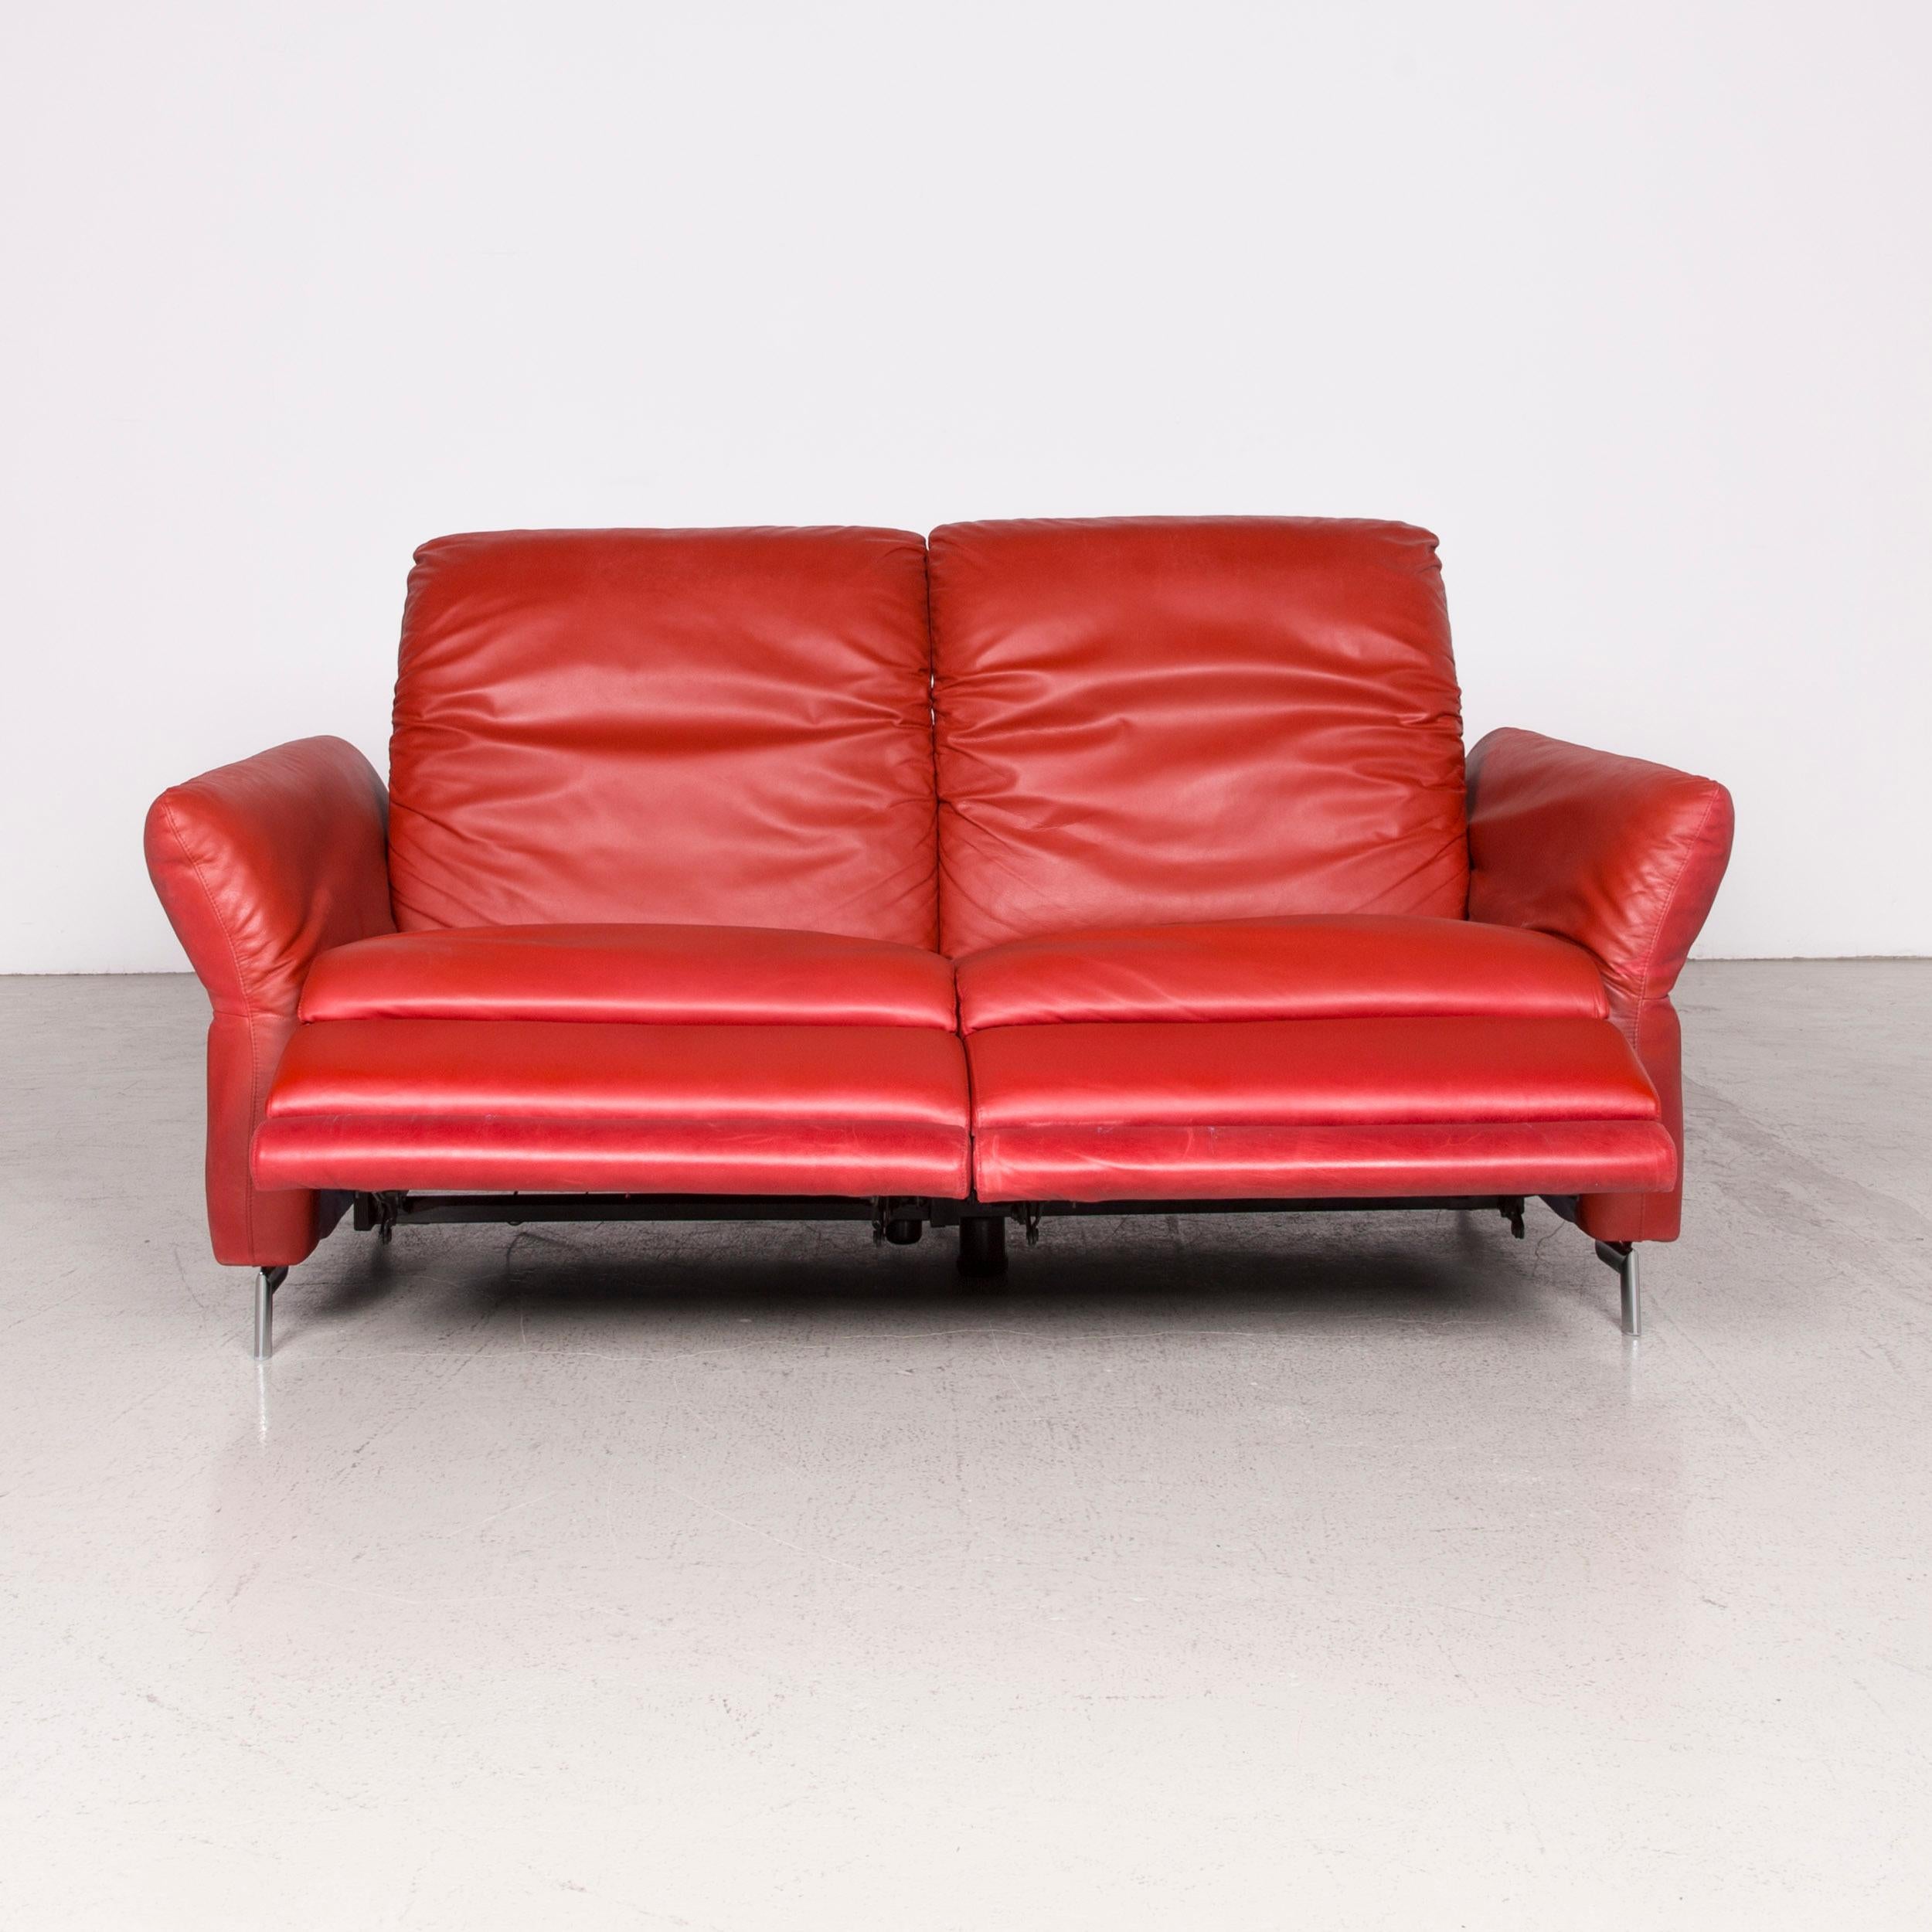 Modern Willi Schillig Siena Designer Leather Sofa Red Real Leather Dreisityer Couch For Sale